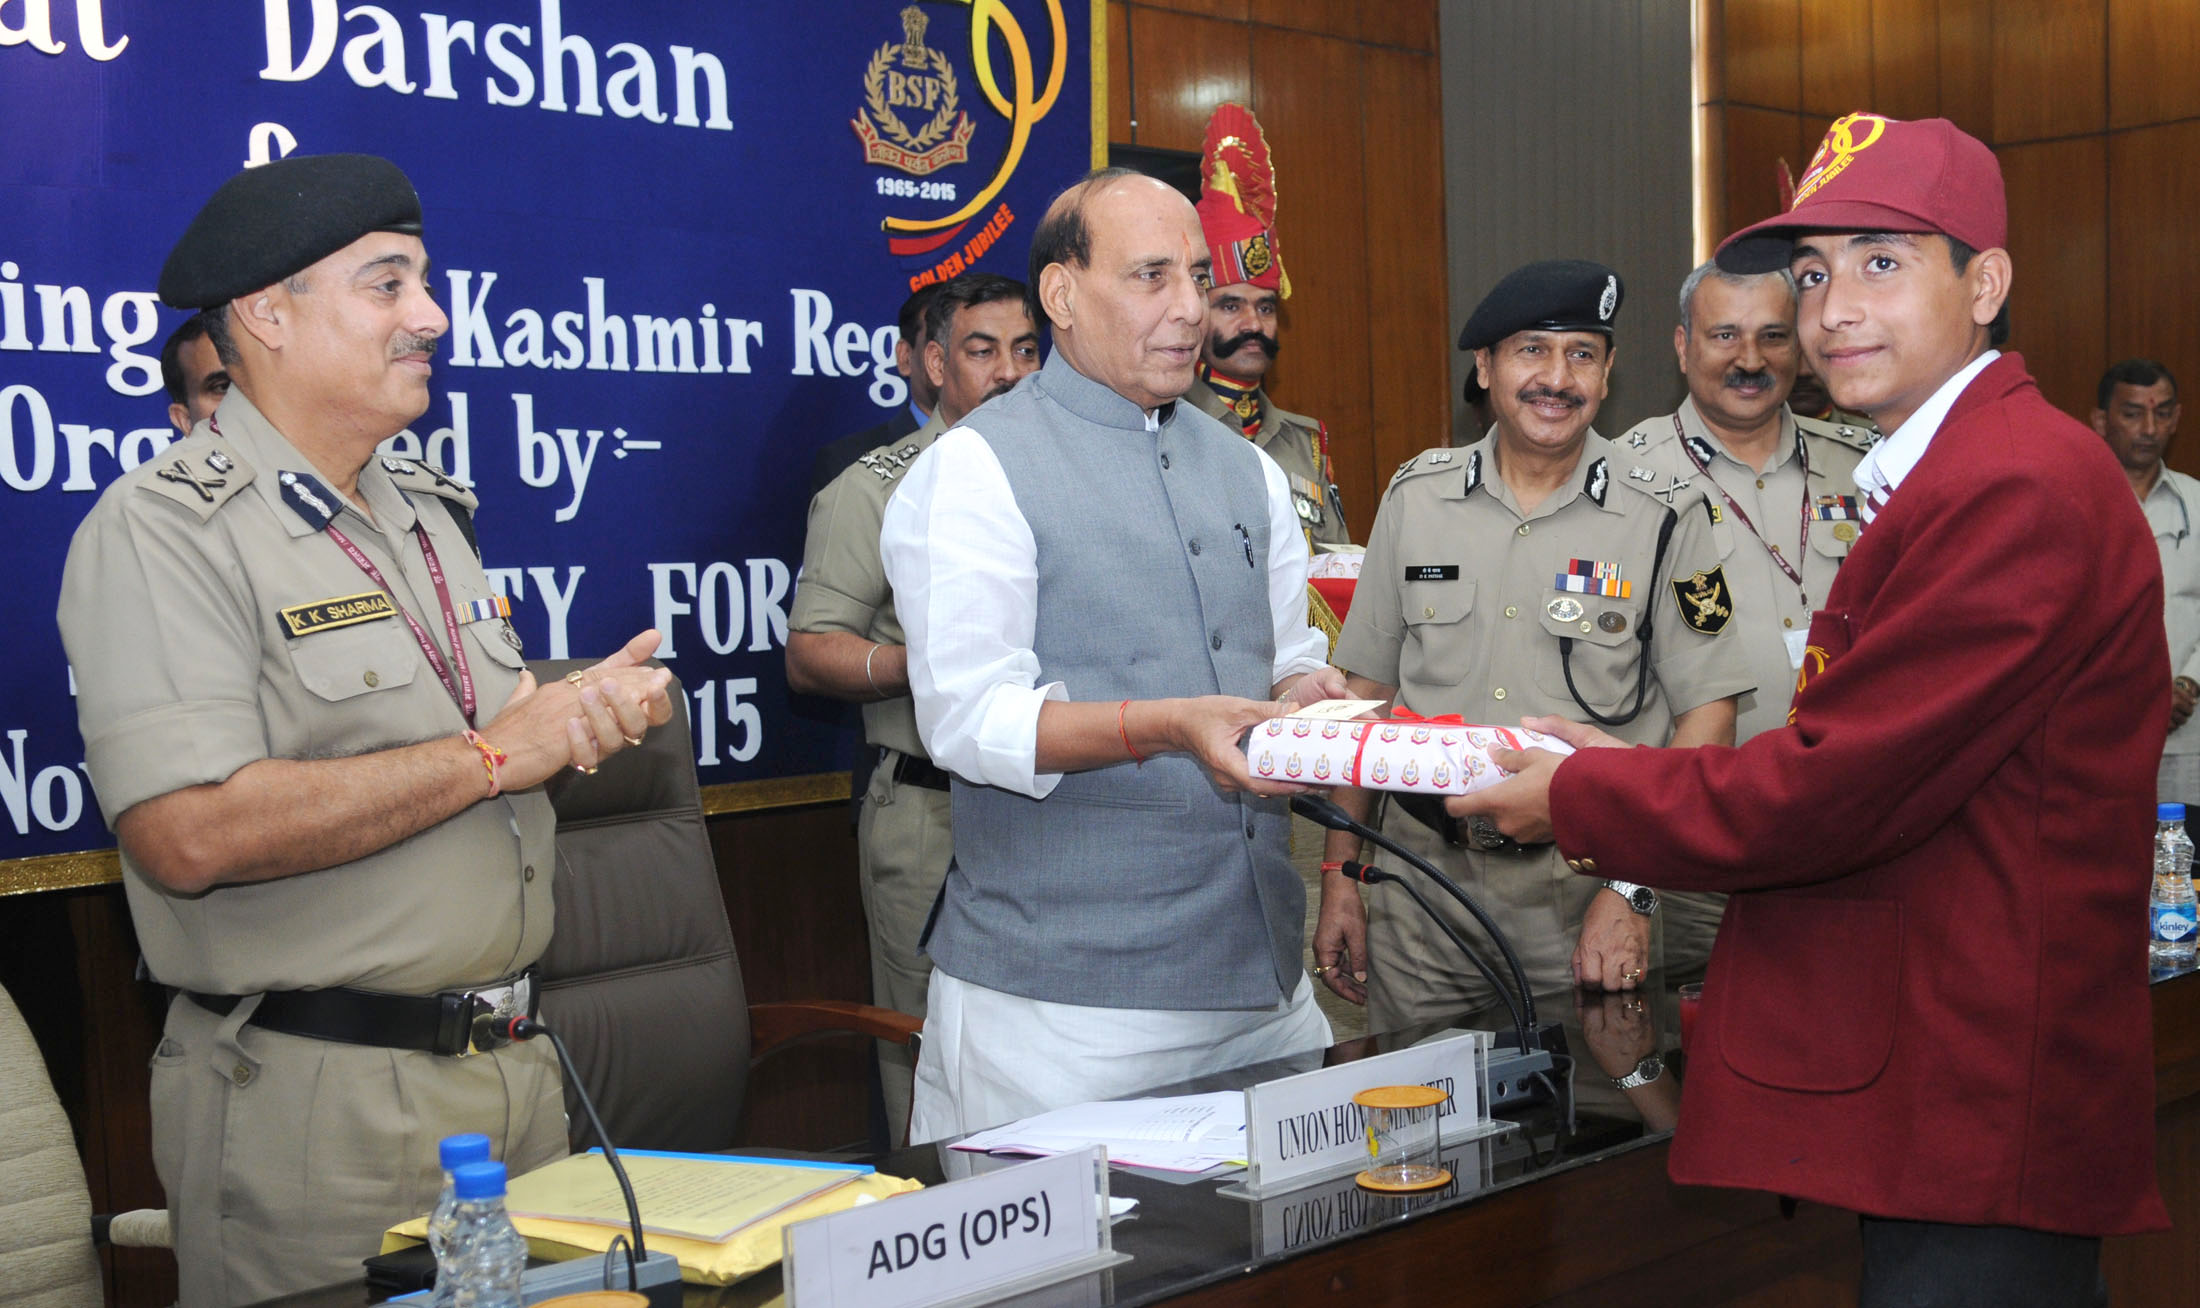 The Union Home Minister, Shri Rajnath Singh presenting gift to the school children from Kashmir region who are on a Bharat Darshan tour being conducted by the Border Security Force, in New Delhi on November 13, 2015. 	The Director General, BSF, Shri D.K. Pathak is also seen.